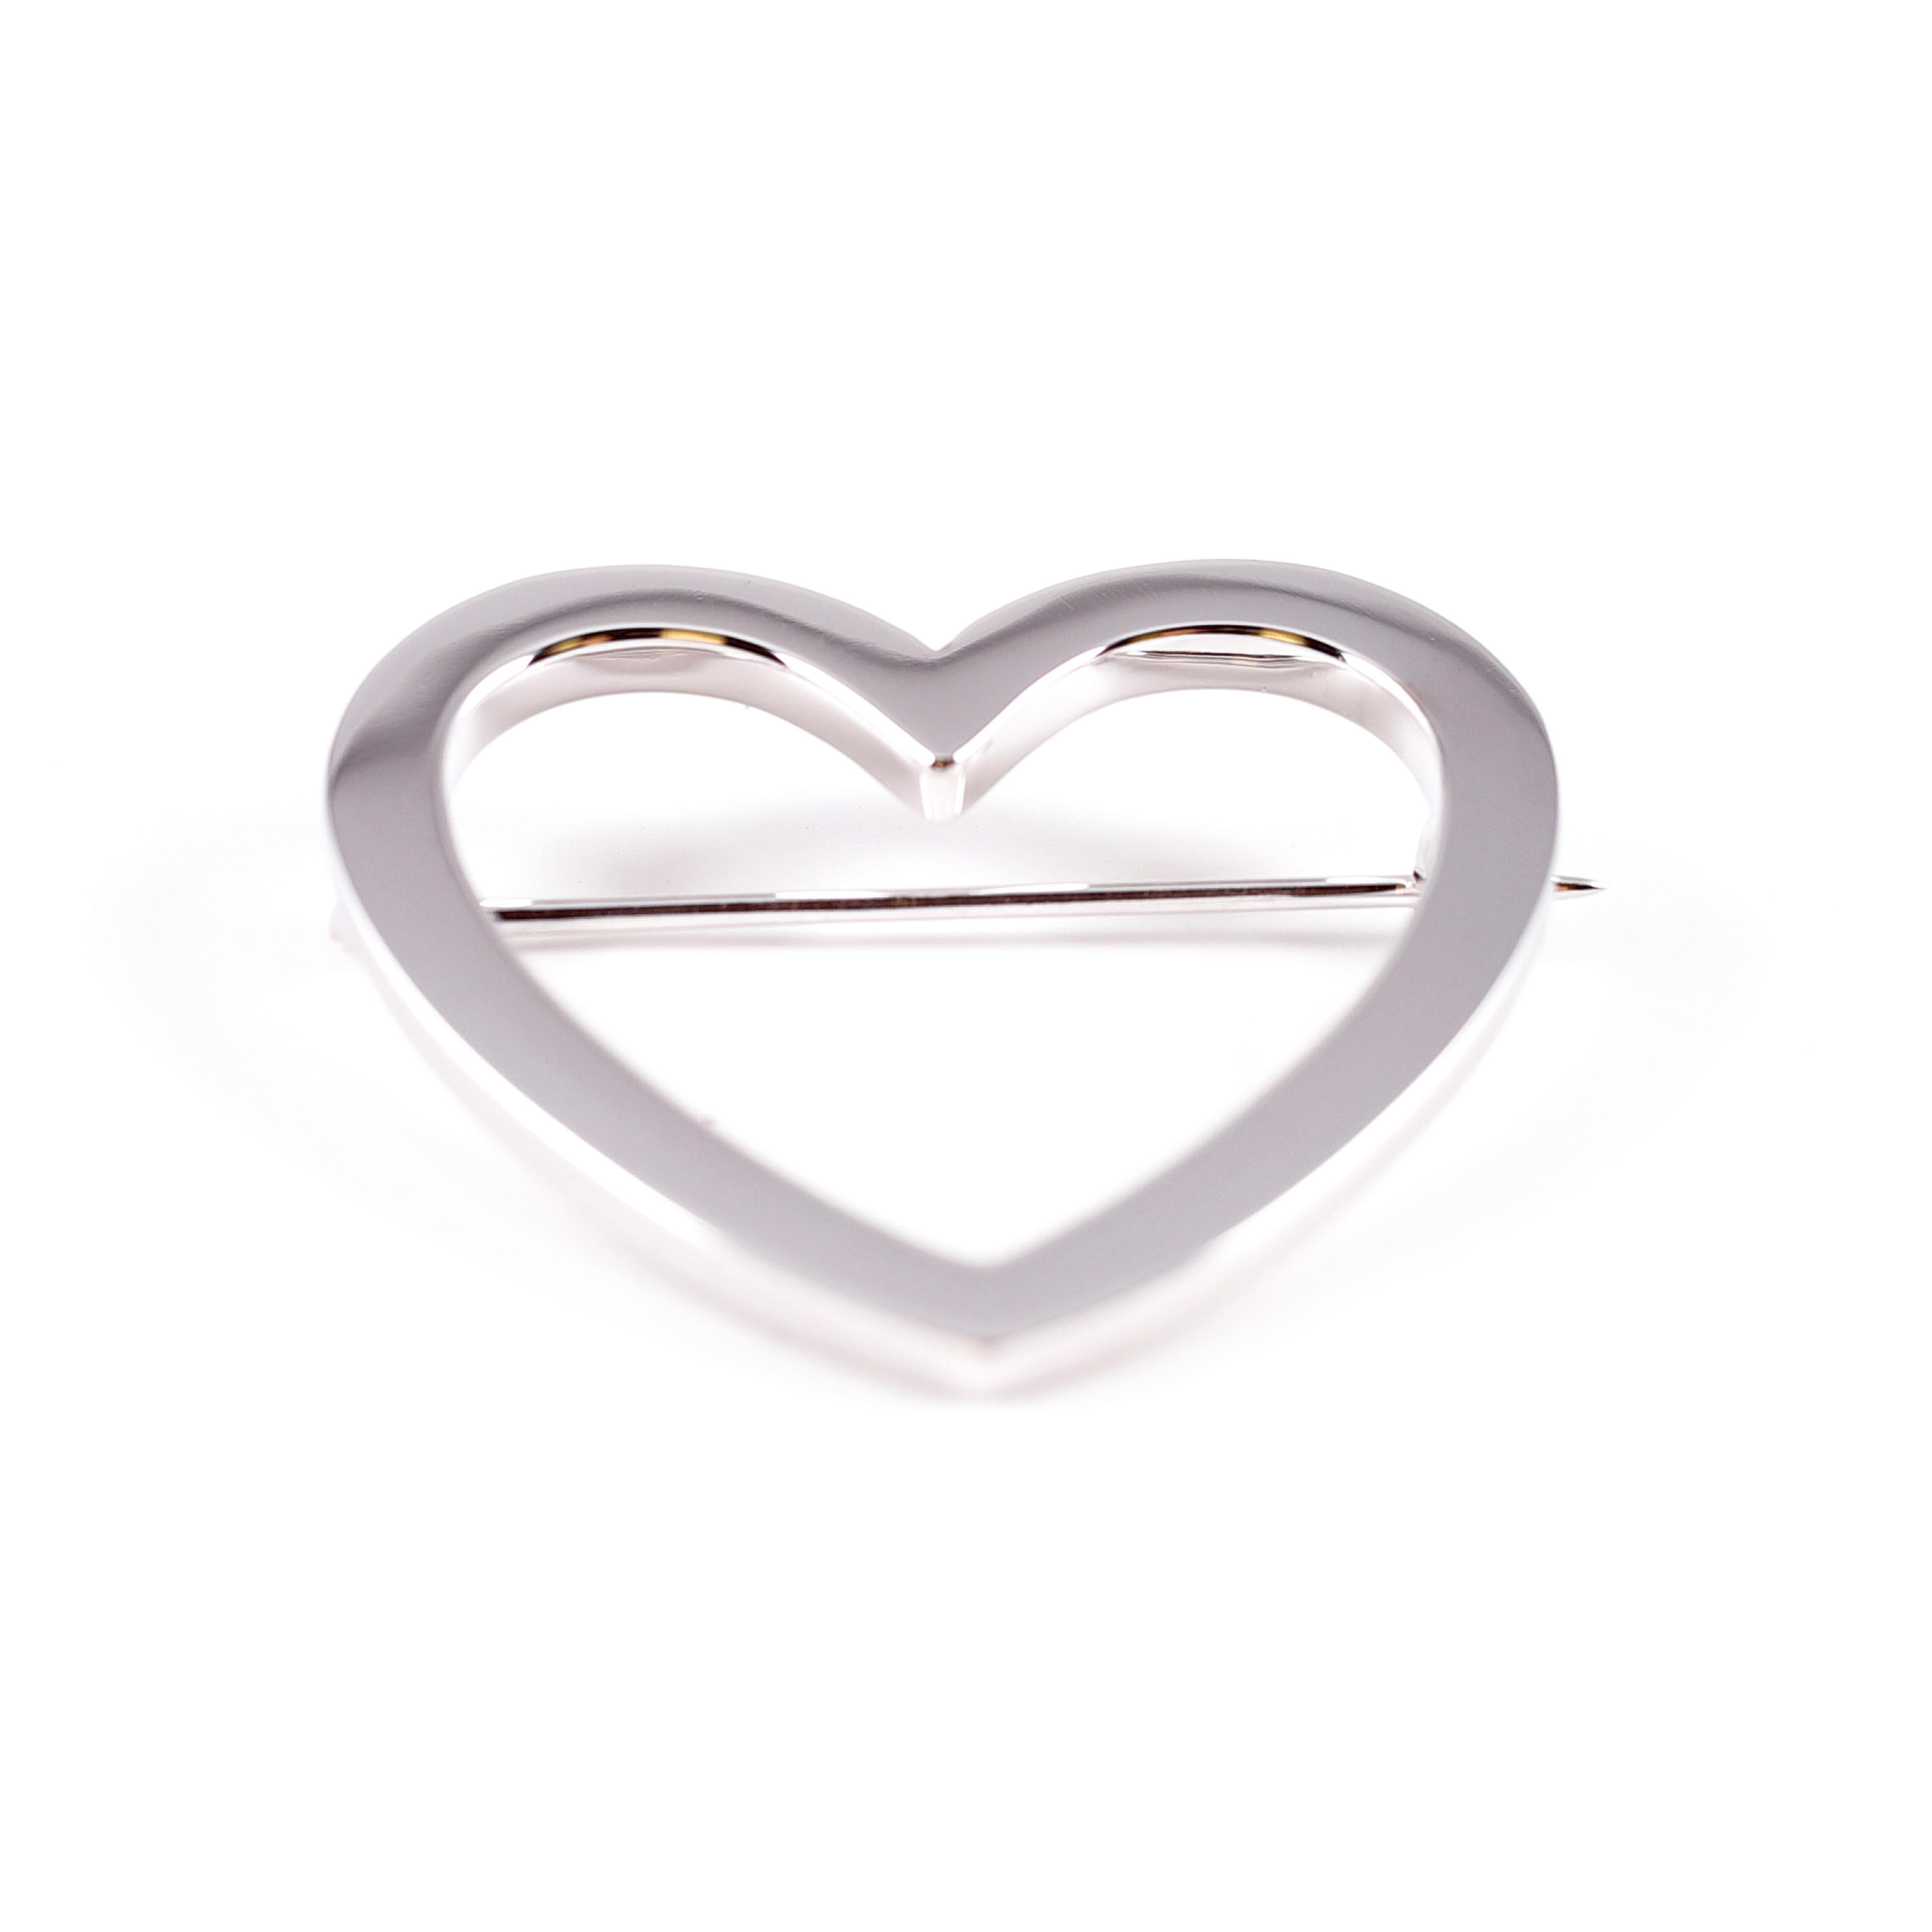 Simply elegant heart pin from Tiffany & Co. in 18 karat white gold.  The heart is a perfect gift for your sweetheart or for yourself!